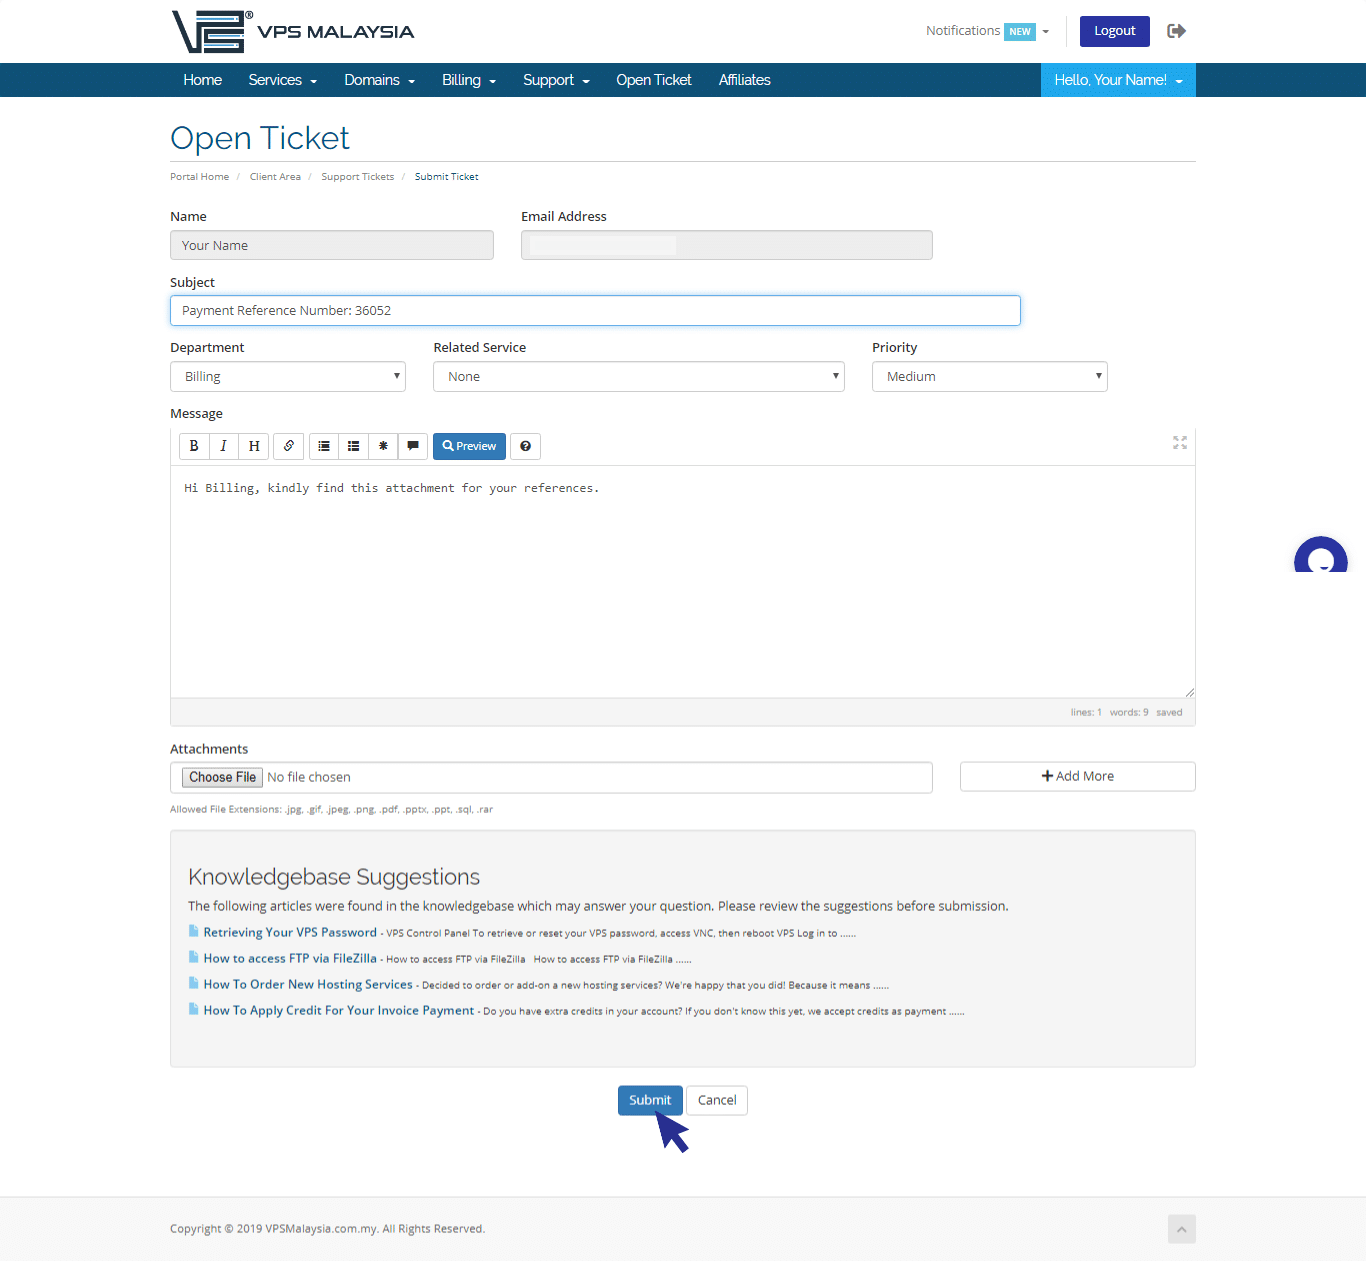 Submit ticket to billing department with receipt attachment for verification process